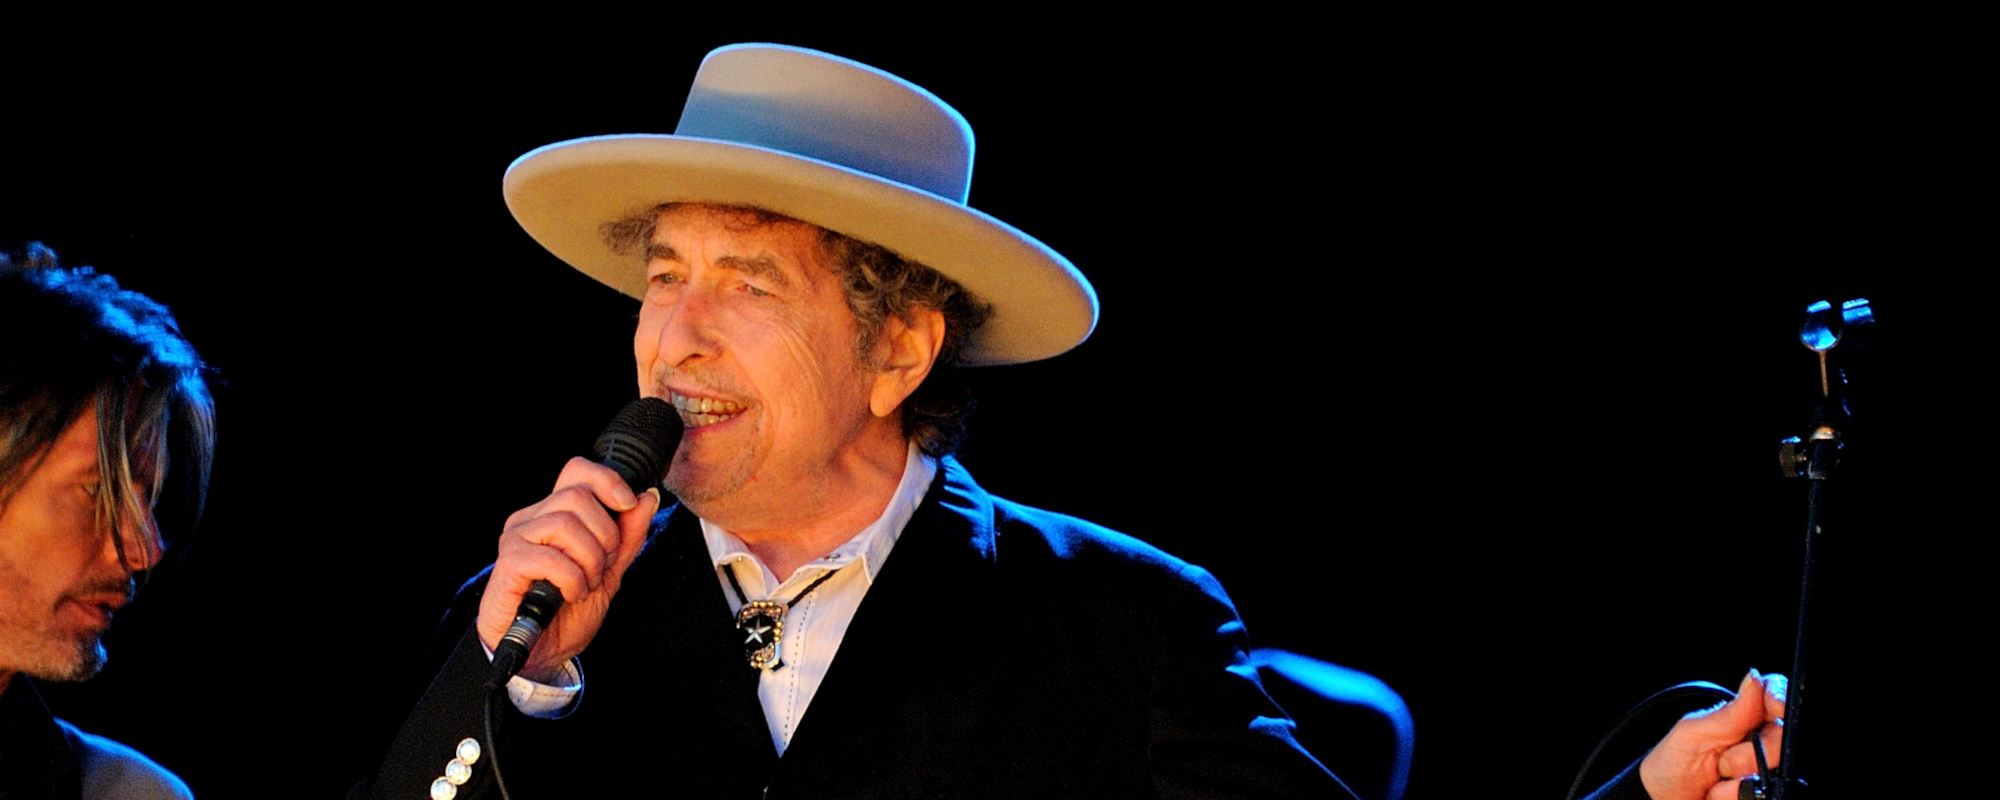 Bob Dylan Lawyers Seeking “Real Consequences” for Sexual Assault Case